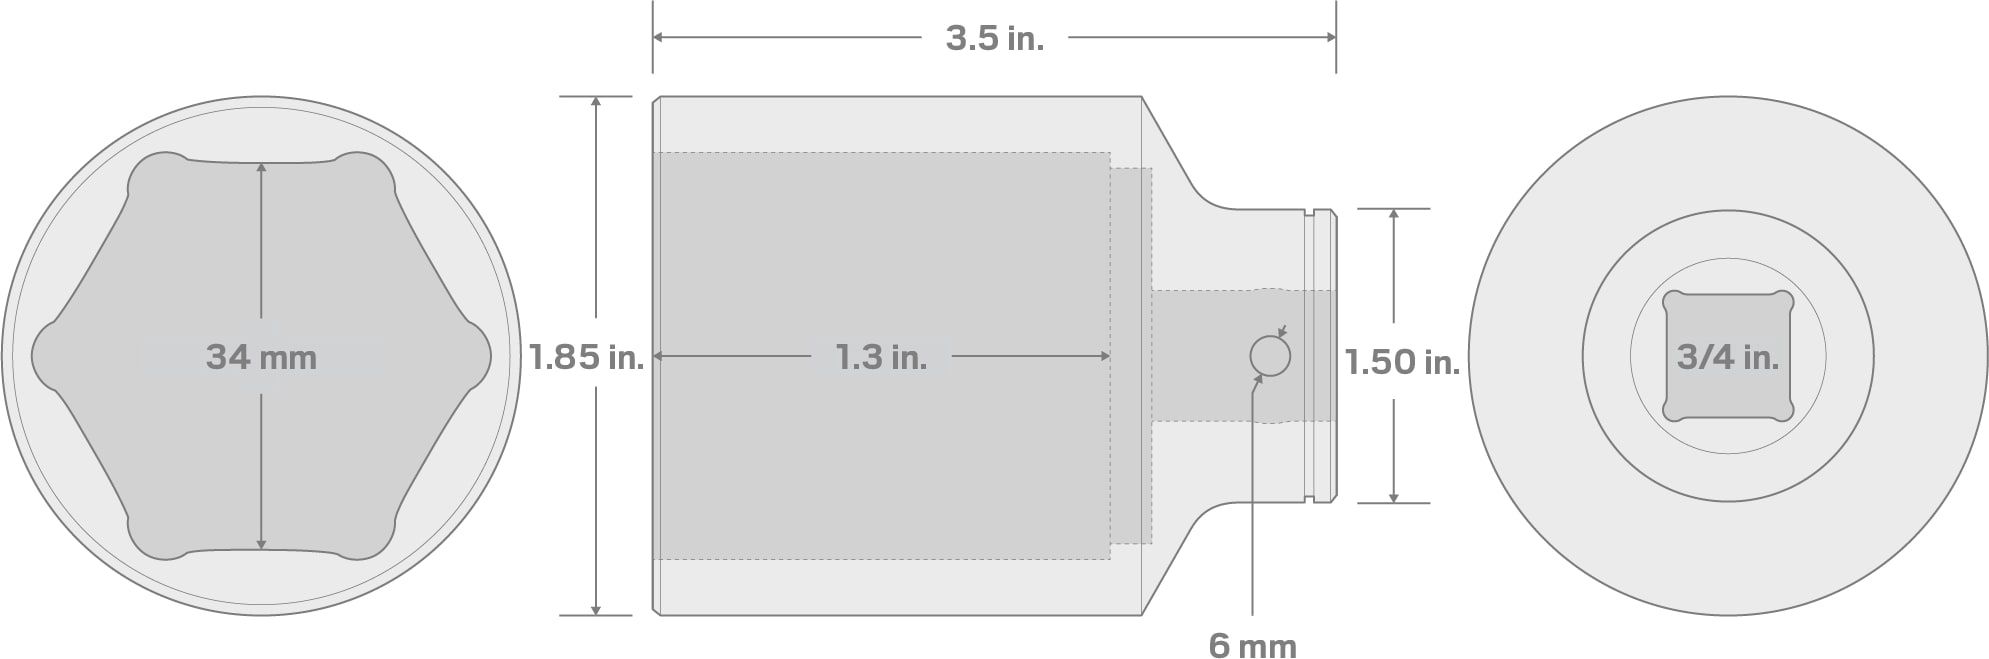 Specs for 3/4 Inch Drive x 34 mm Deep 6-Point Socket